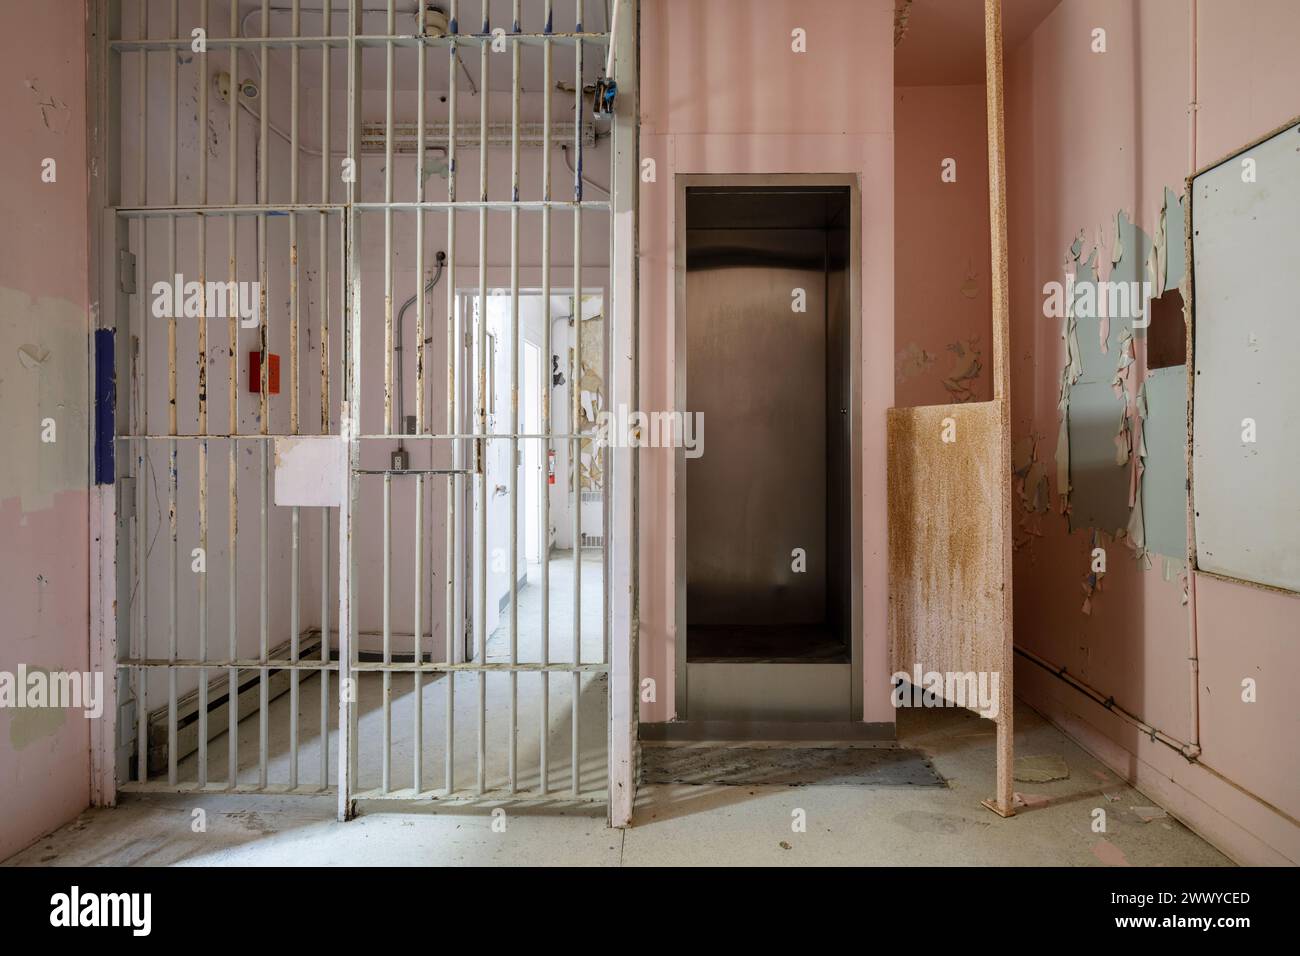 A shower stall inside an abandoned prison. Stock Photo